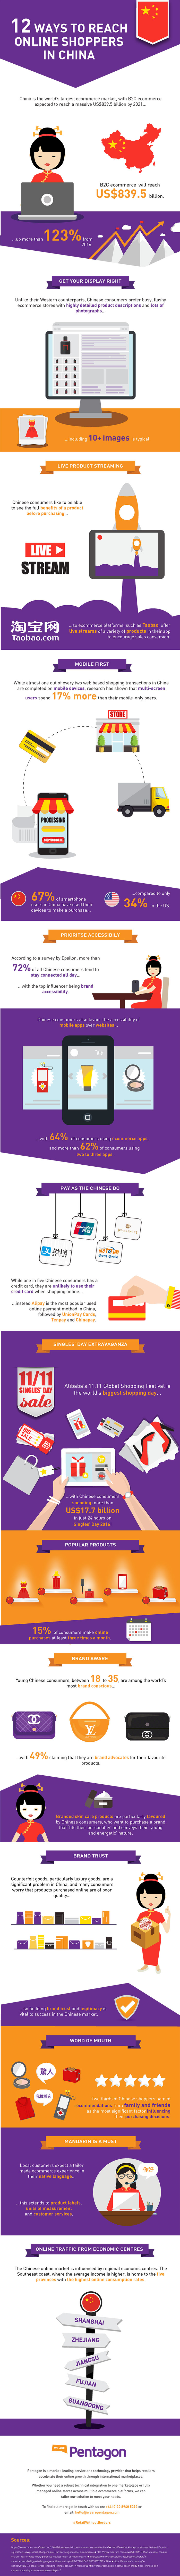  12-ways-to-reach-online-shoppers-in-china